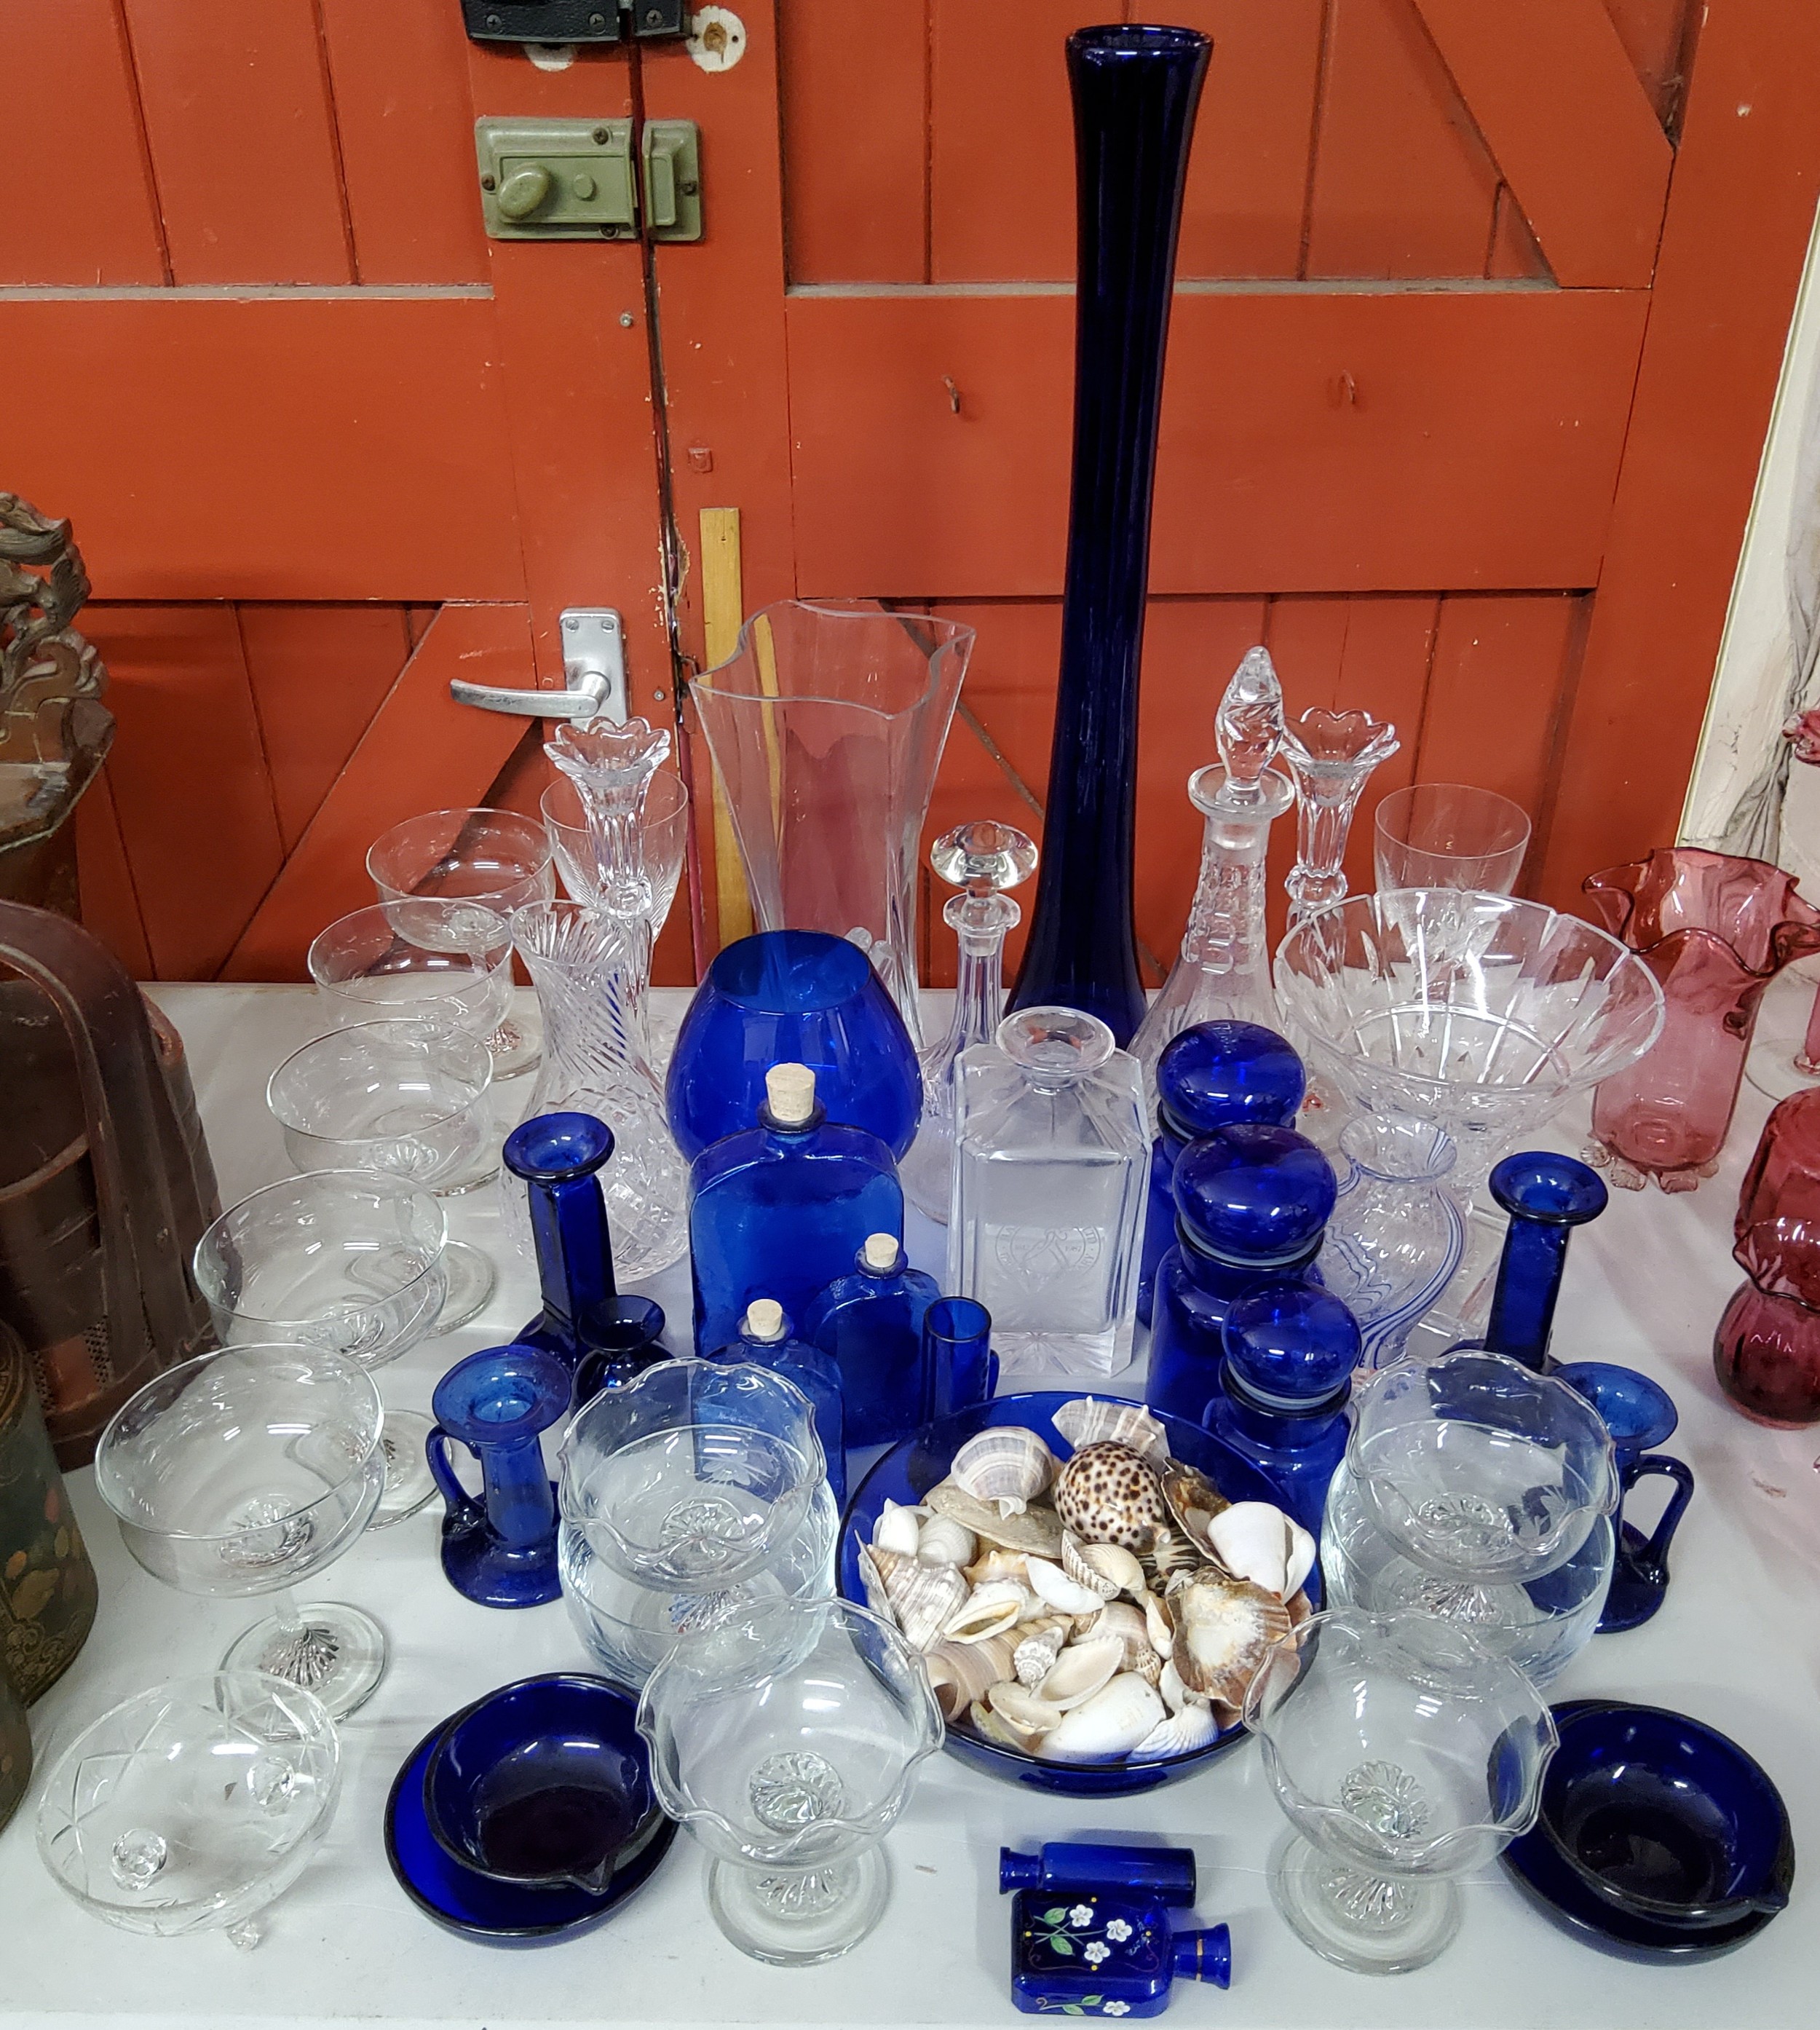 Glassware - Bristol blue examples including chamberstick, candlesticks, bottles, a very large